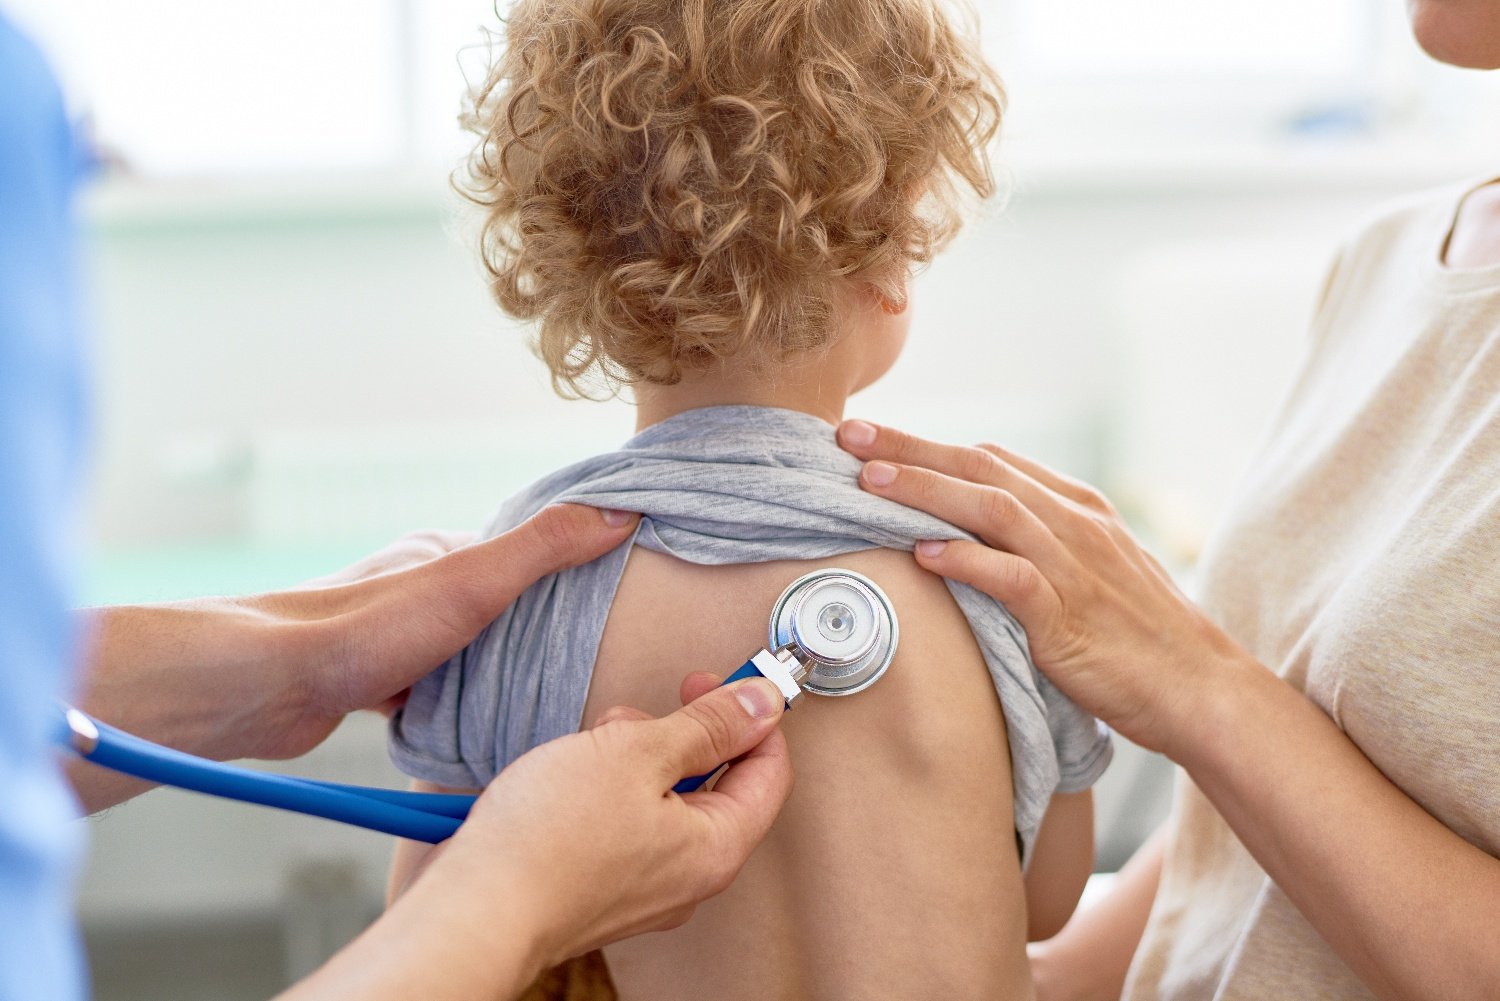 Should You Take Your Child to Urgent Care?